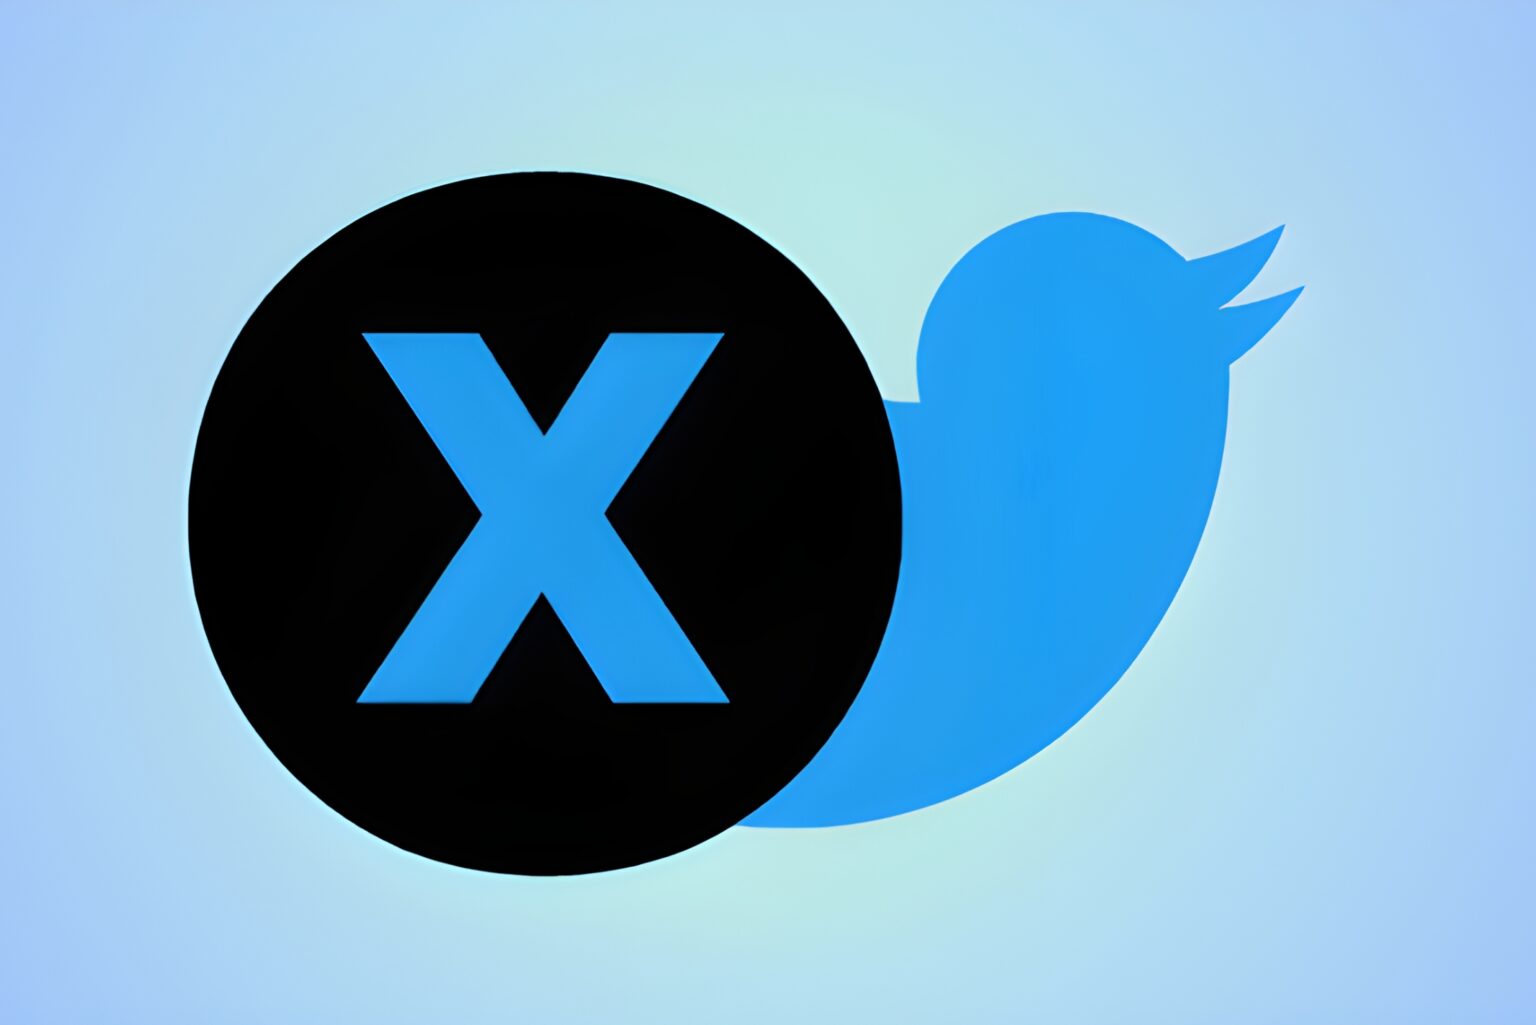 Elon Musk claims that Twitter will soon be rebranded to X